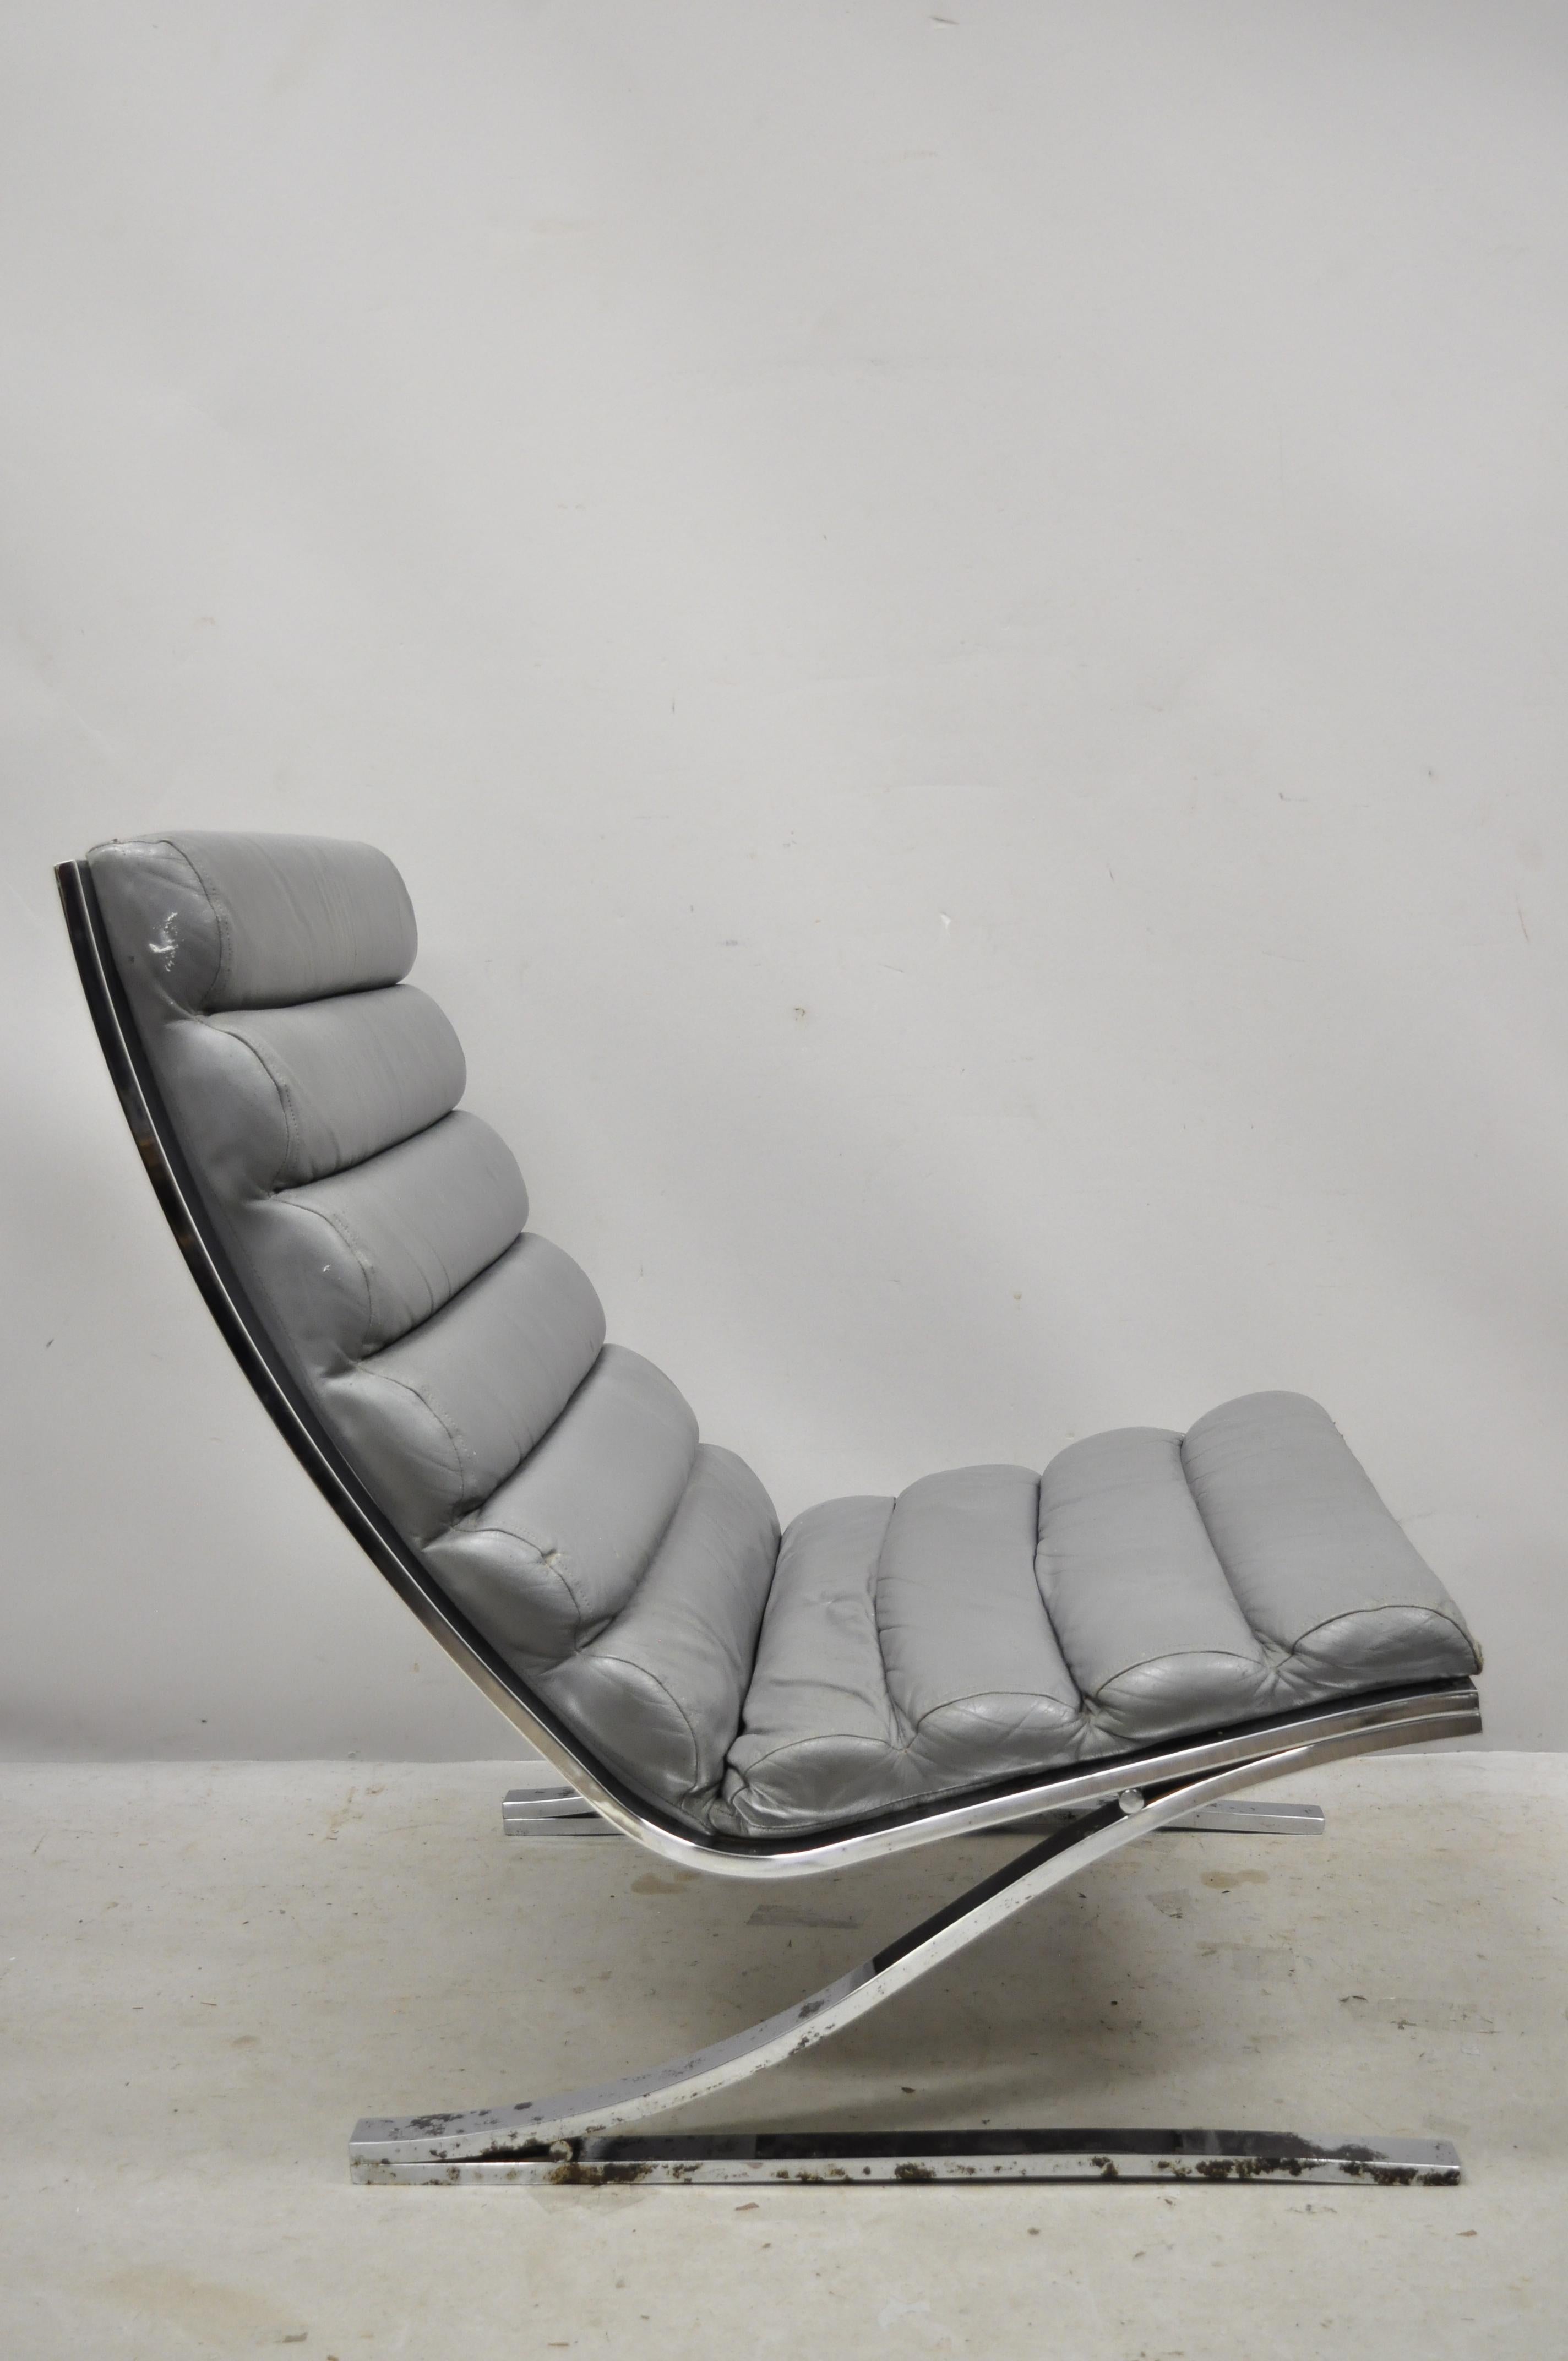 George Mulhauser Design Institute of America DIA chrome steel grey leather lounge club chair. Item features heavy chrome-plated steel frame, gray leather channeled upholstery, original label, clean modernist lines, sleek sculptural form, circa mid